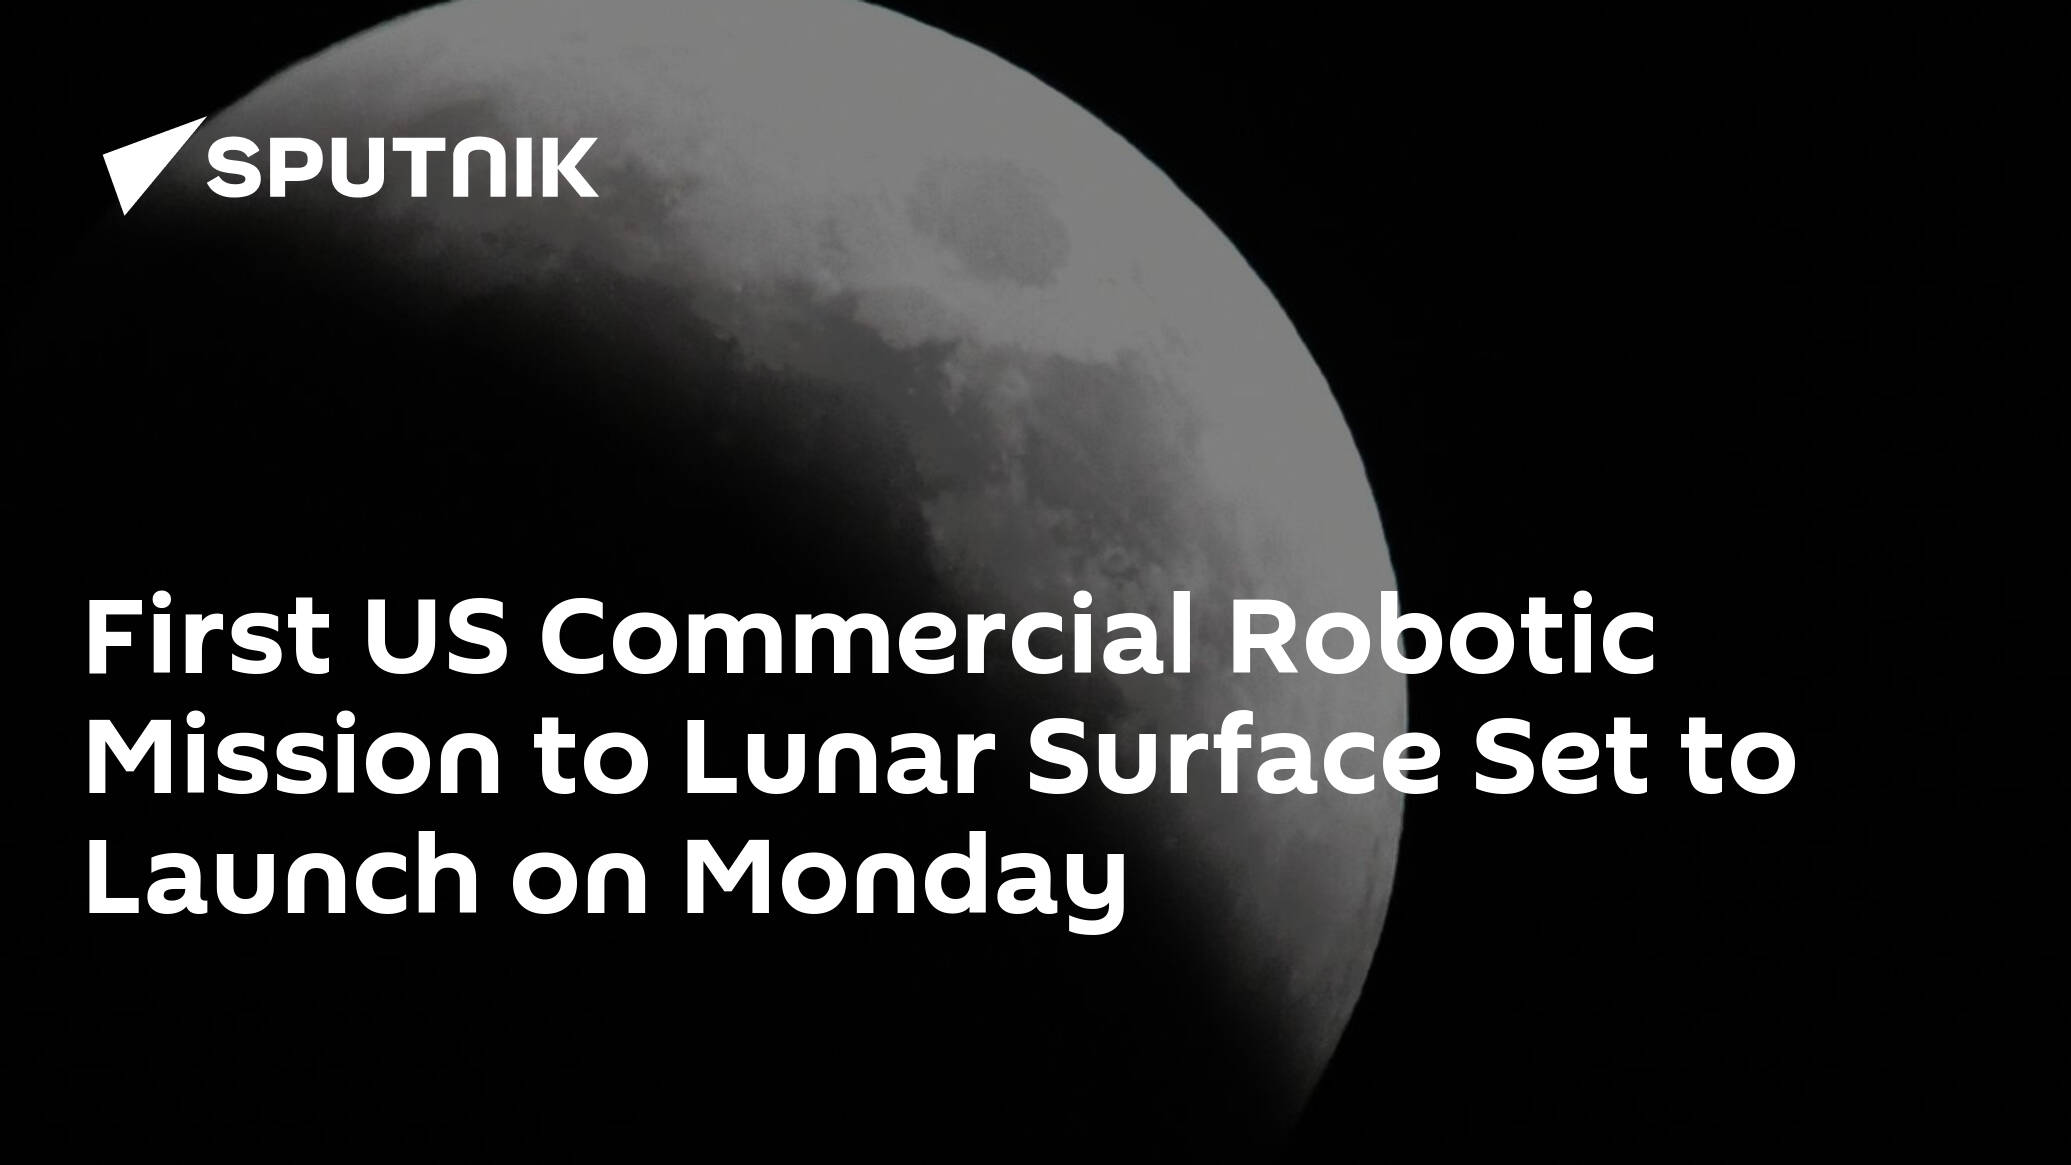 First US Commercial Robotic Mission to Lunar Surface Set to Launch on Monday